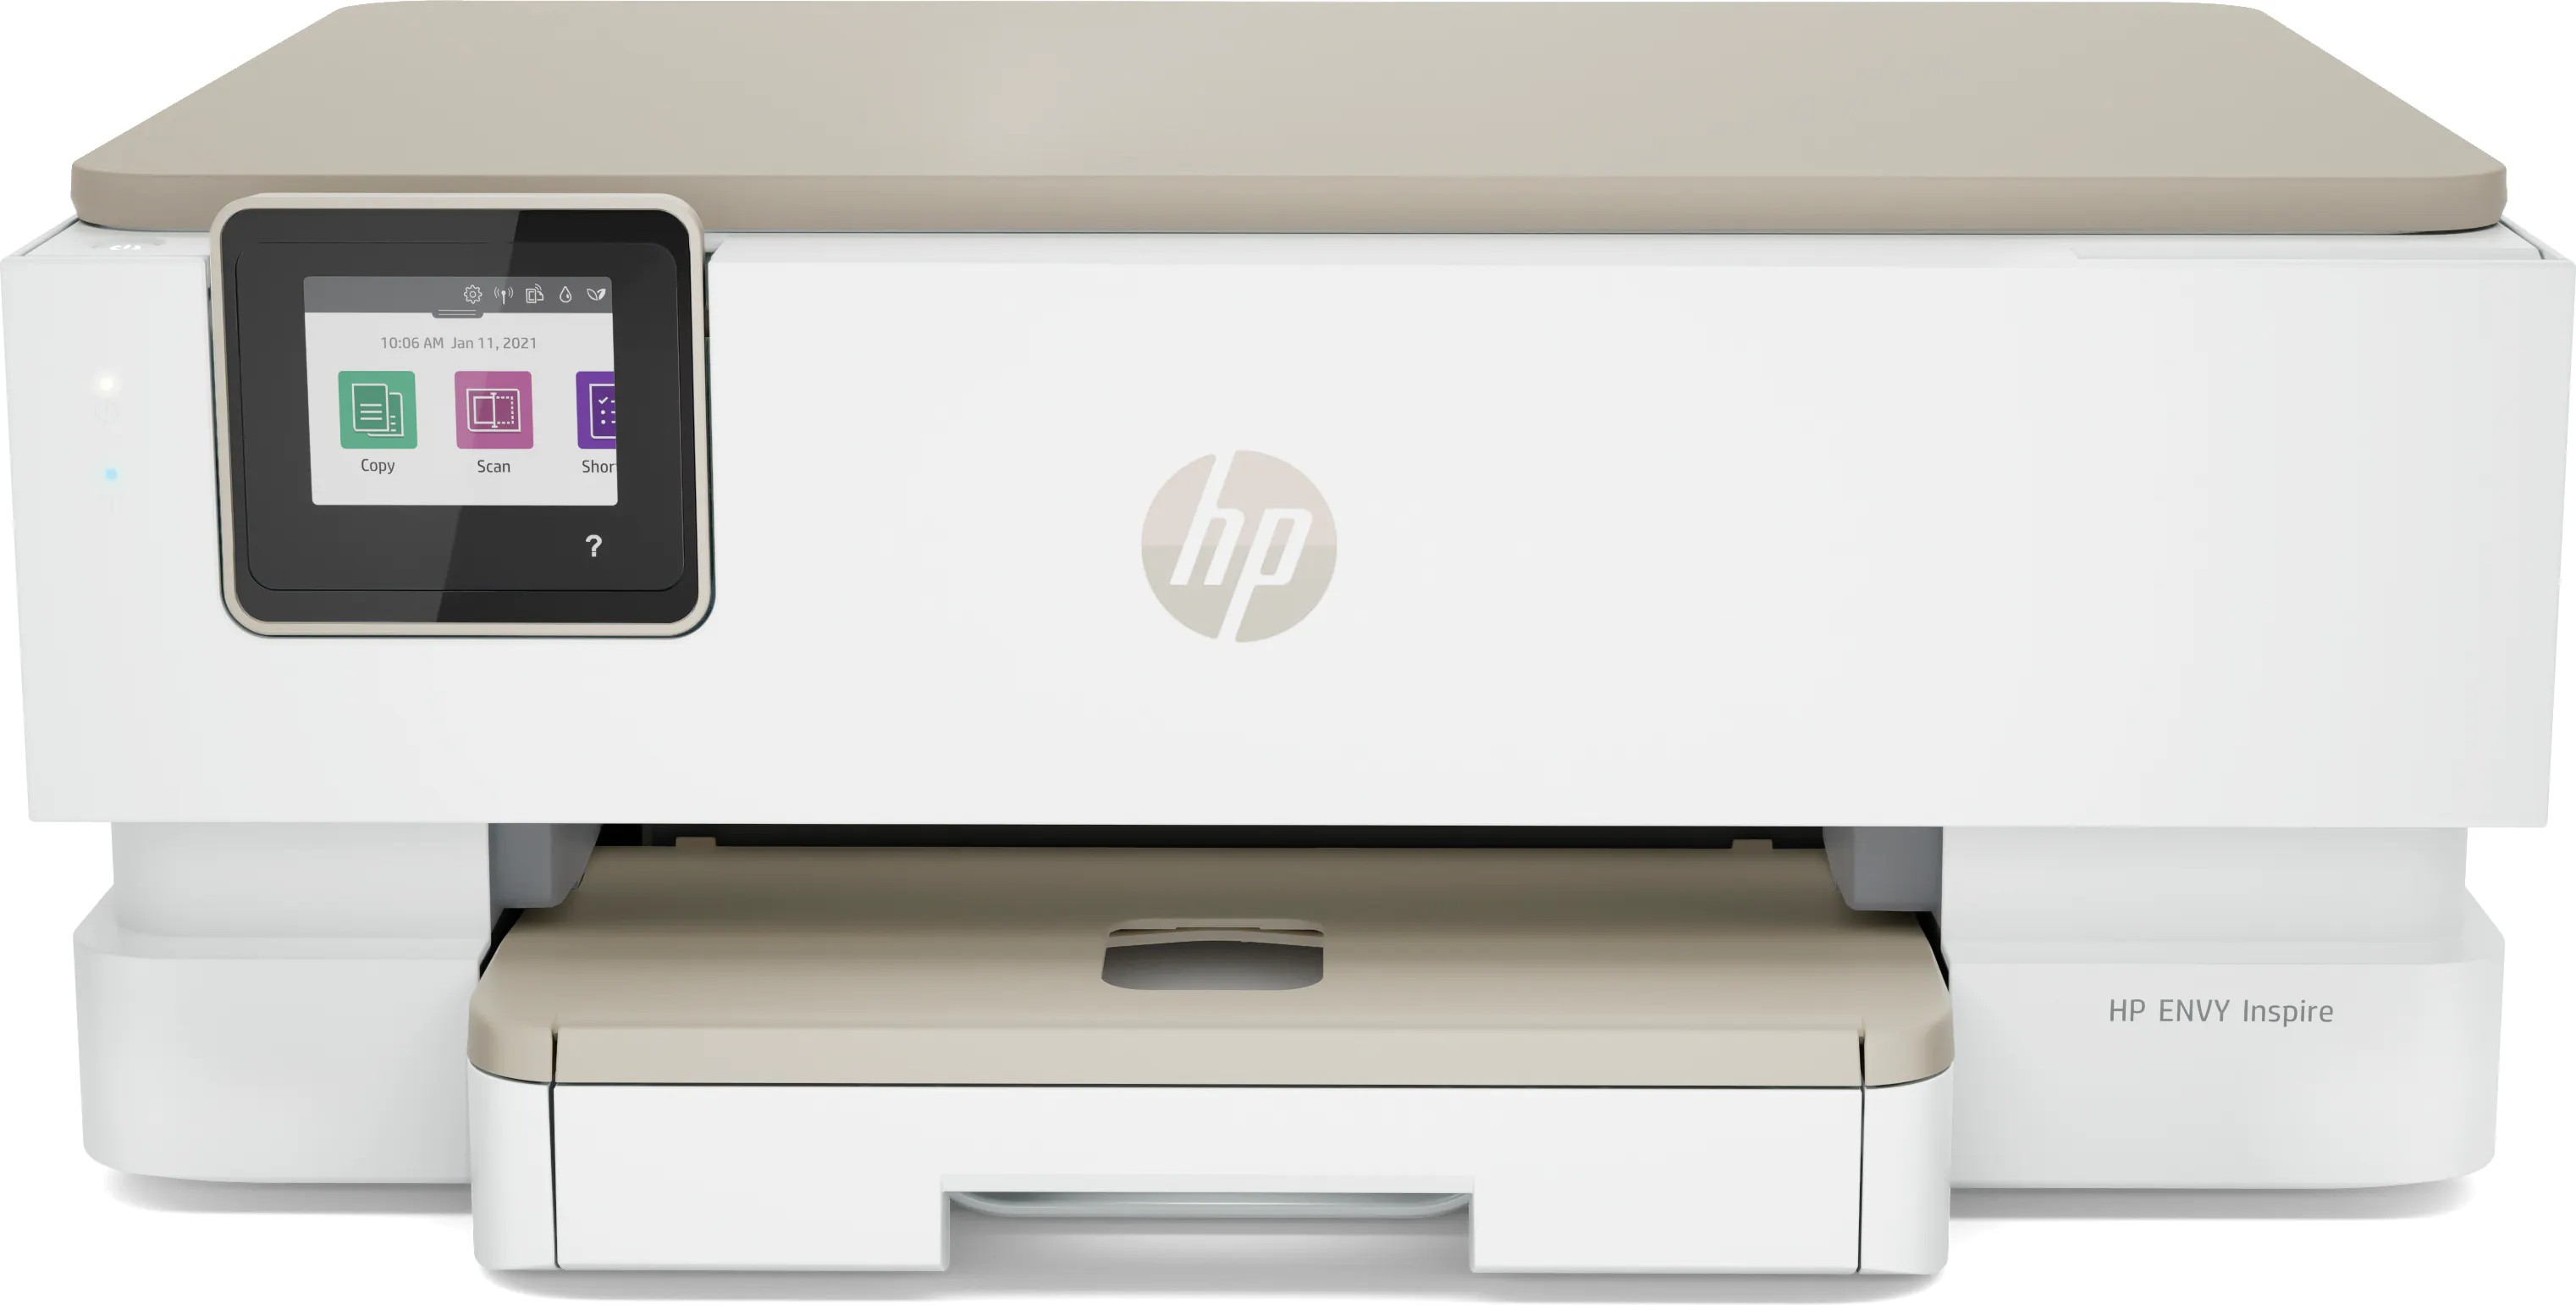 Obrázek HP ENVY Inspire 7220e All-in-One printer, HP Instant Ink, HP+